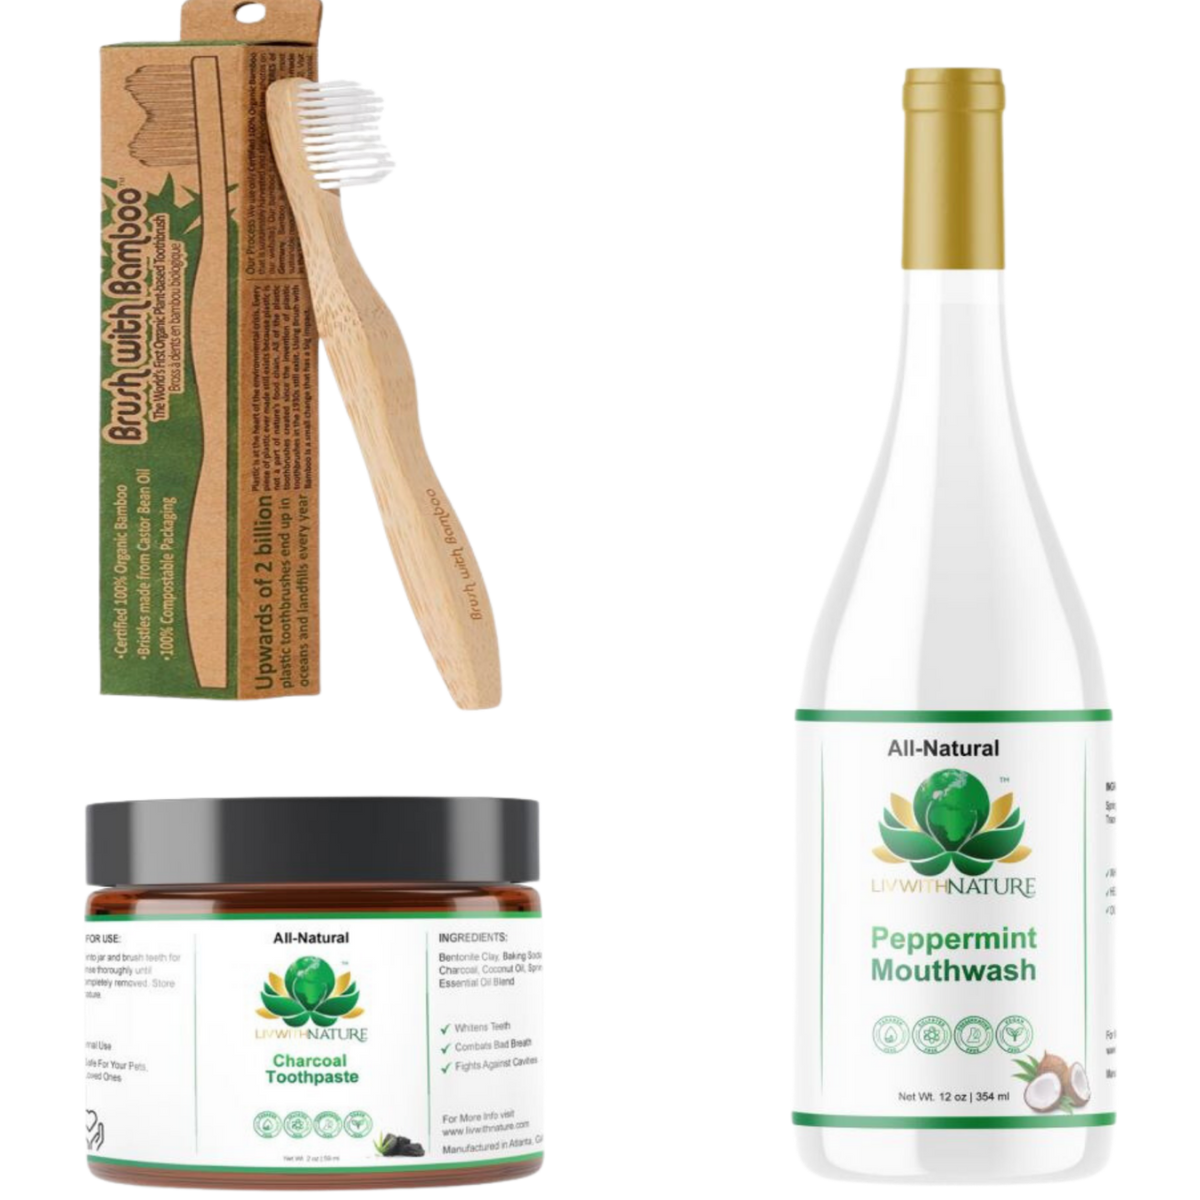 All-Natural Oral Care